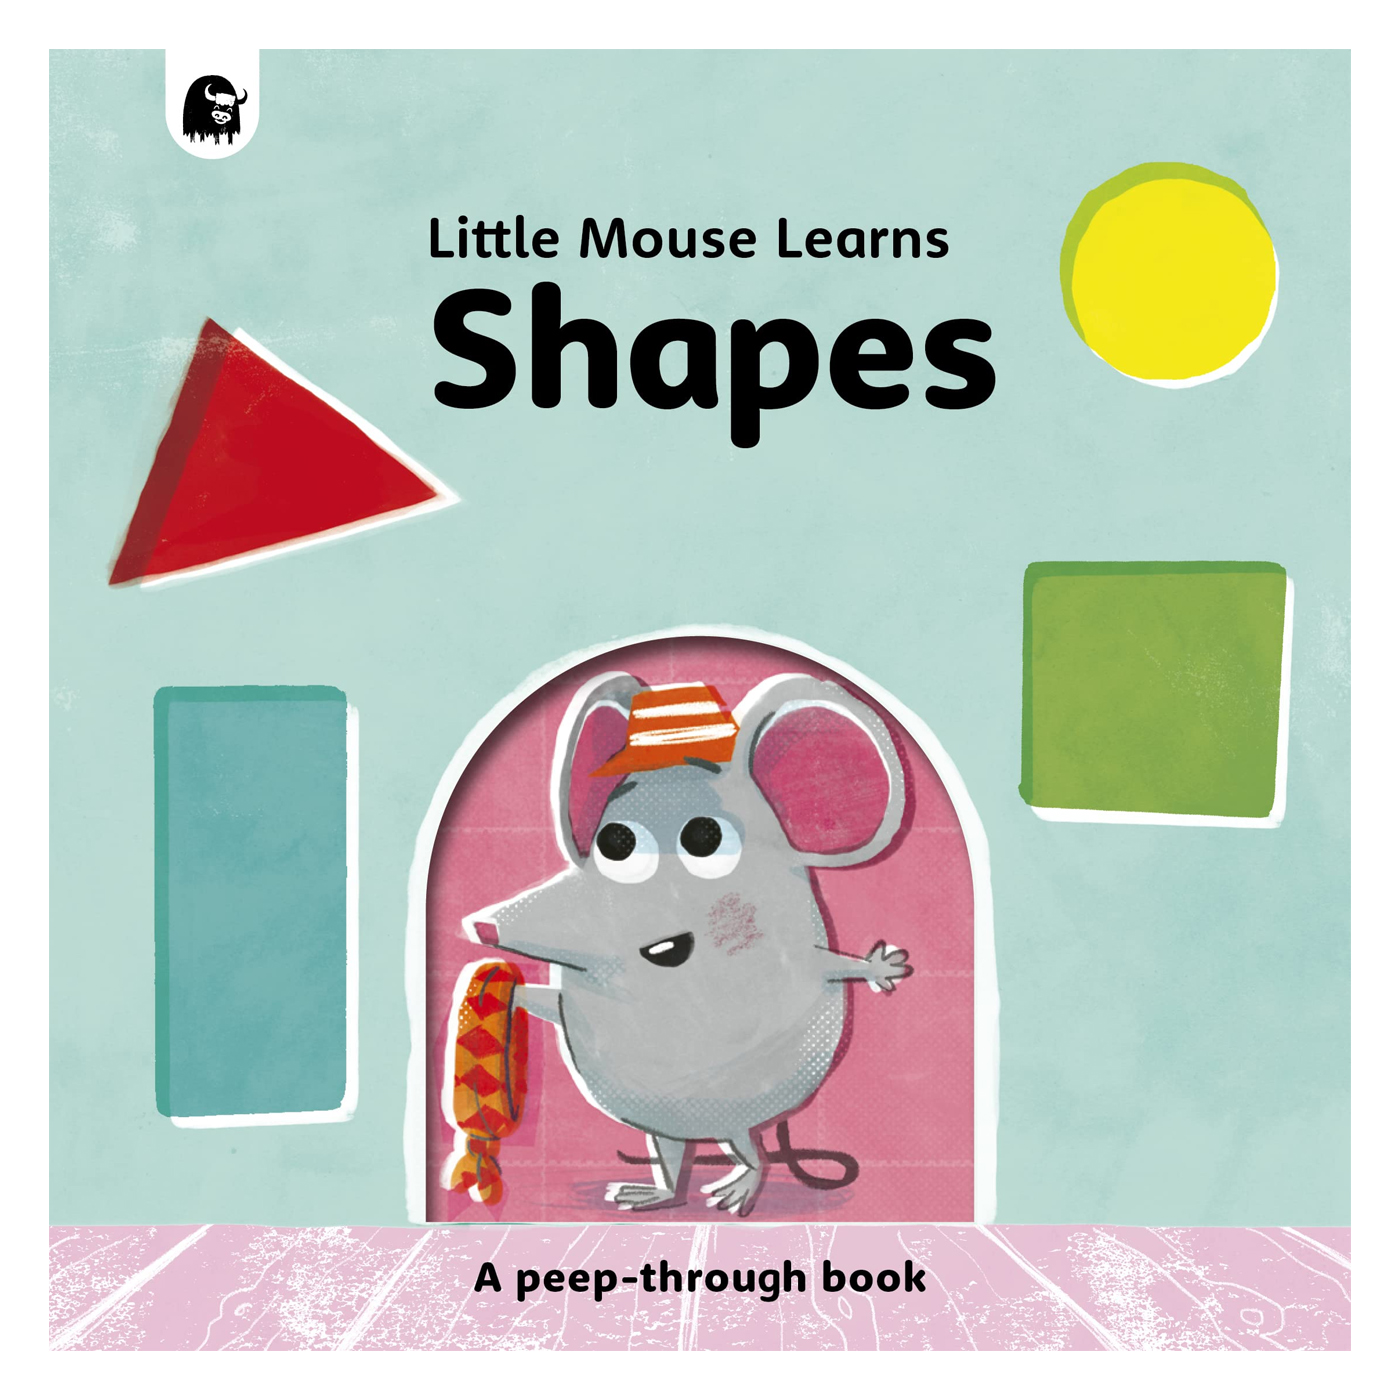  Little Mouse Learns Shapes